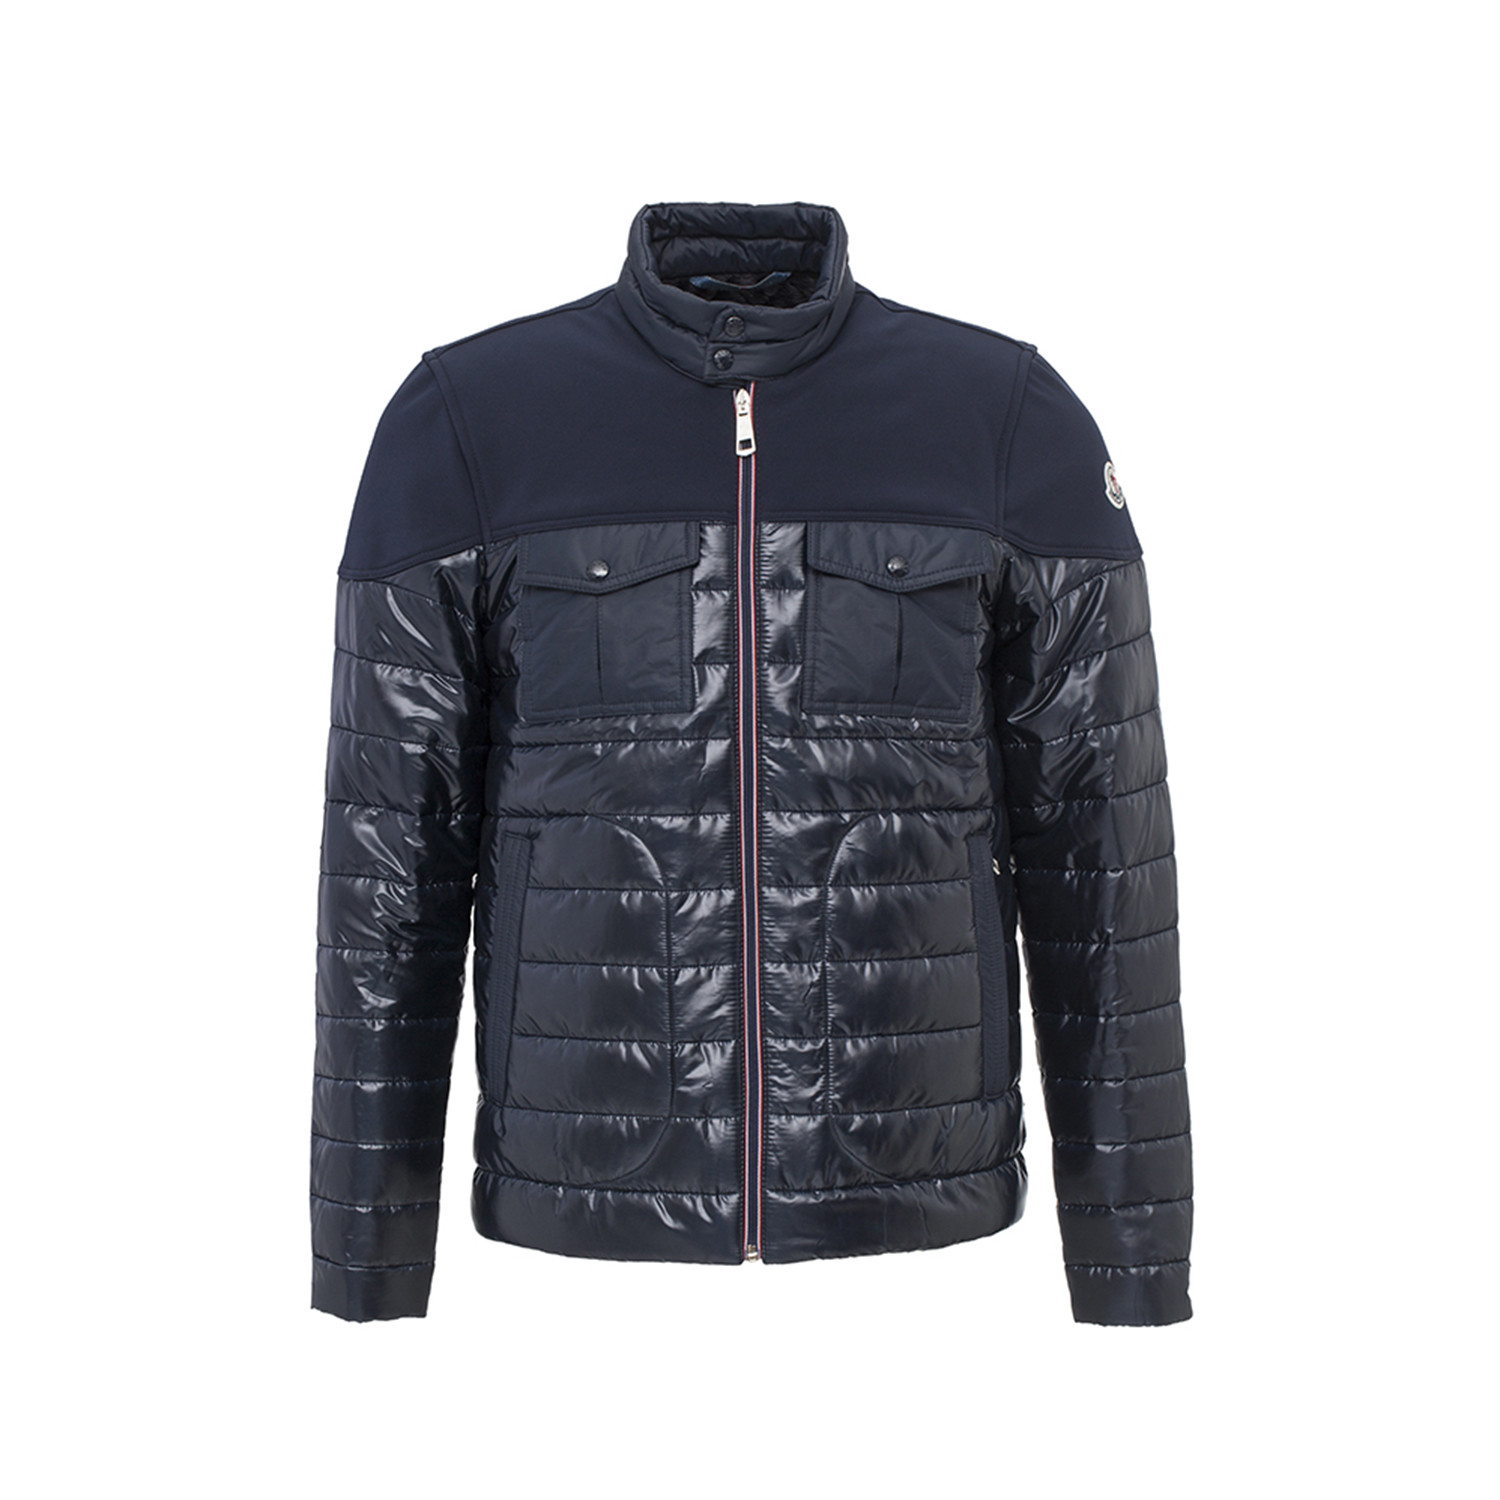 Moncler // Mixed Texture Patch Pocket Puffer // Navy (S) - Canada Goose ...